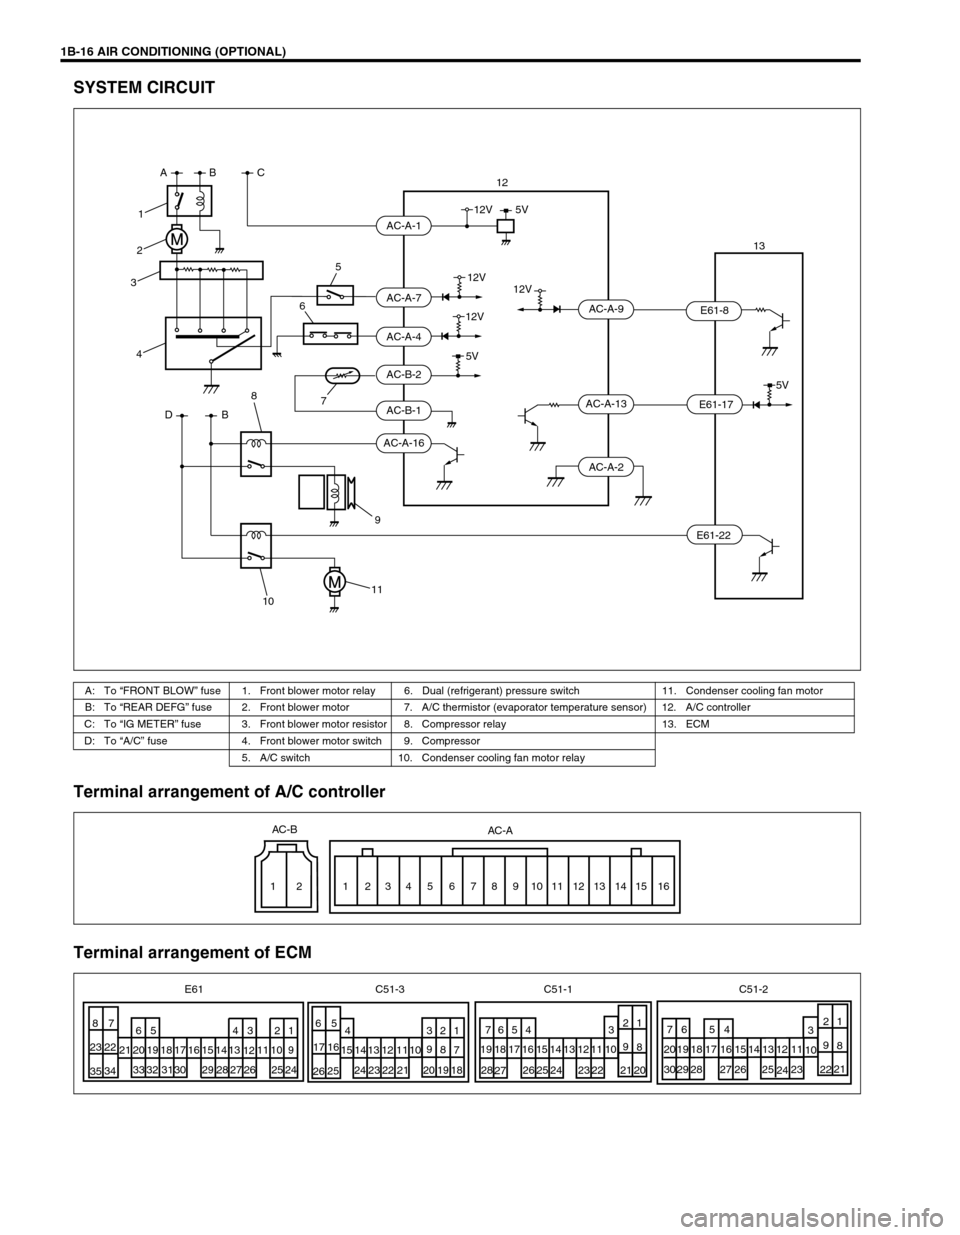 SUZUKI GRAND VITARA 1999 2.G Owners Manual 1B-16 AIR CONDITIONING (OPTIONAL)
SYSTEM CIRCUIT
Terminal arrangement of A/C controller
Terminal arrangement of ECM
A: To “FRONT BLOW” fuse 1. Front blower motor relay 6. Dual (refrigerant) pressu